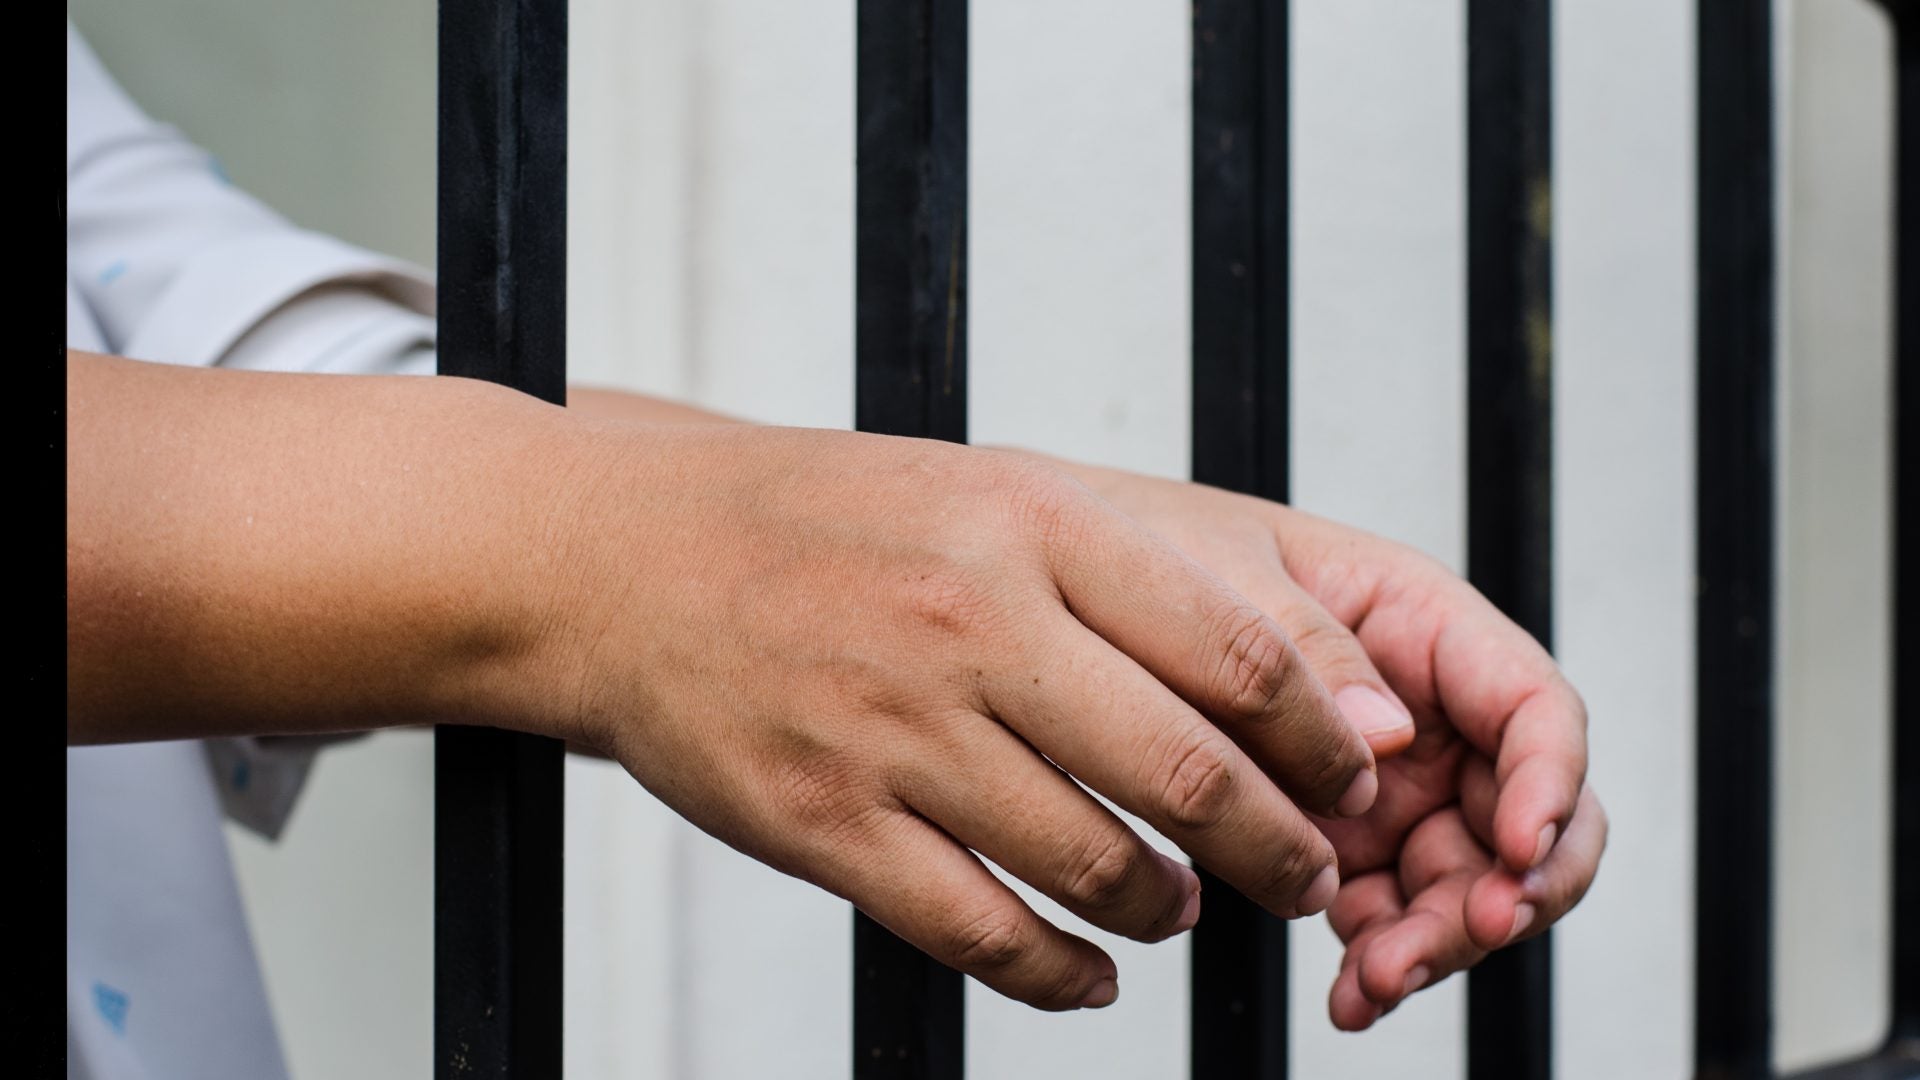 Colorado Woman Files Lawsuit After Being Left Alone To Give Birth In Jail Cell